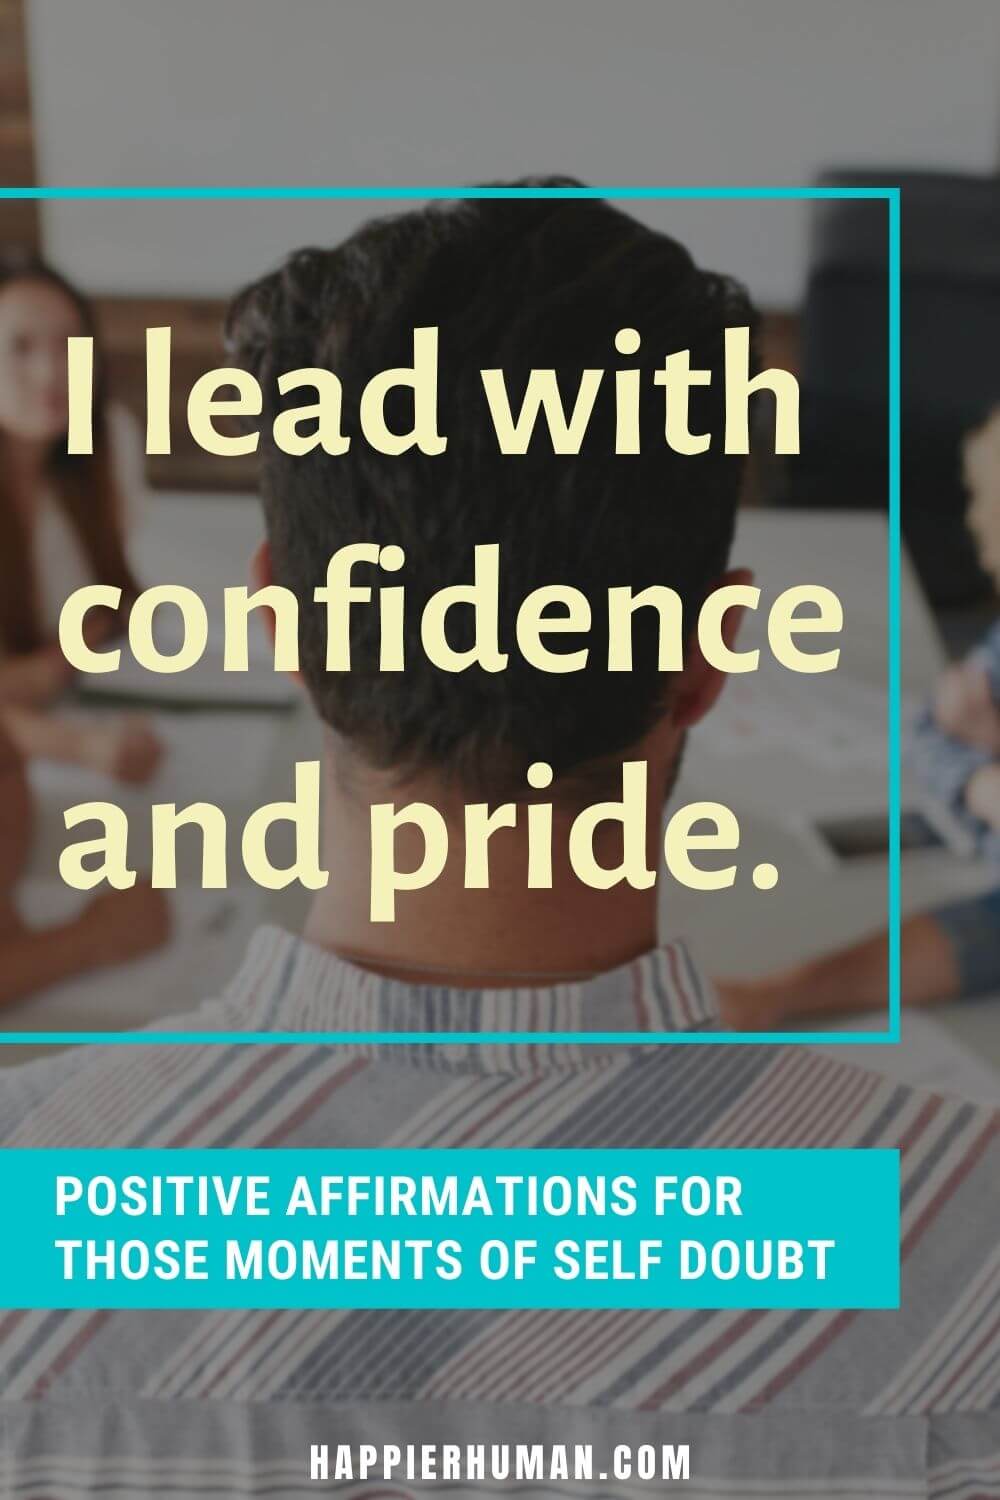 Affirmations for Self Doubt - I lead with confidence and pride. | affirmations for self love and healing | affirmations for self discipline | affirmations for confidence and success